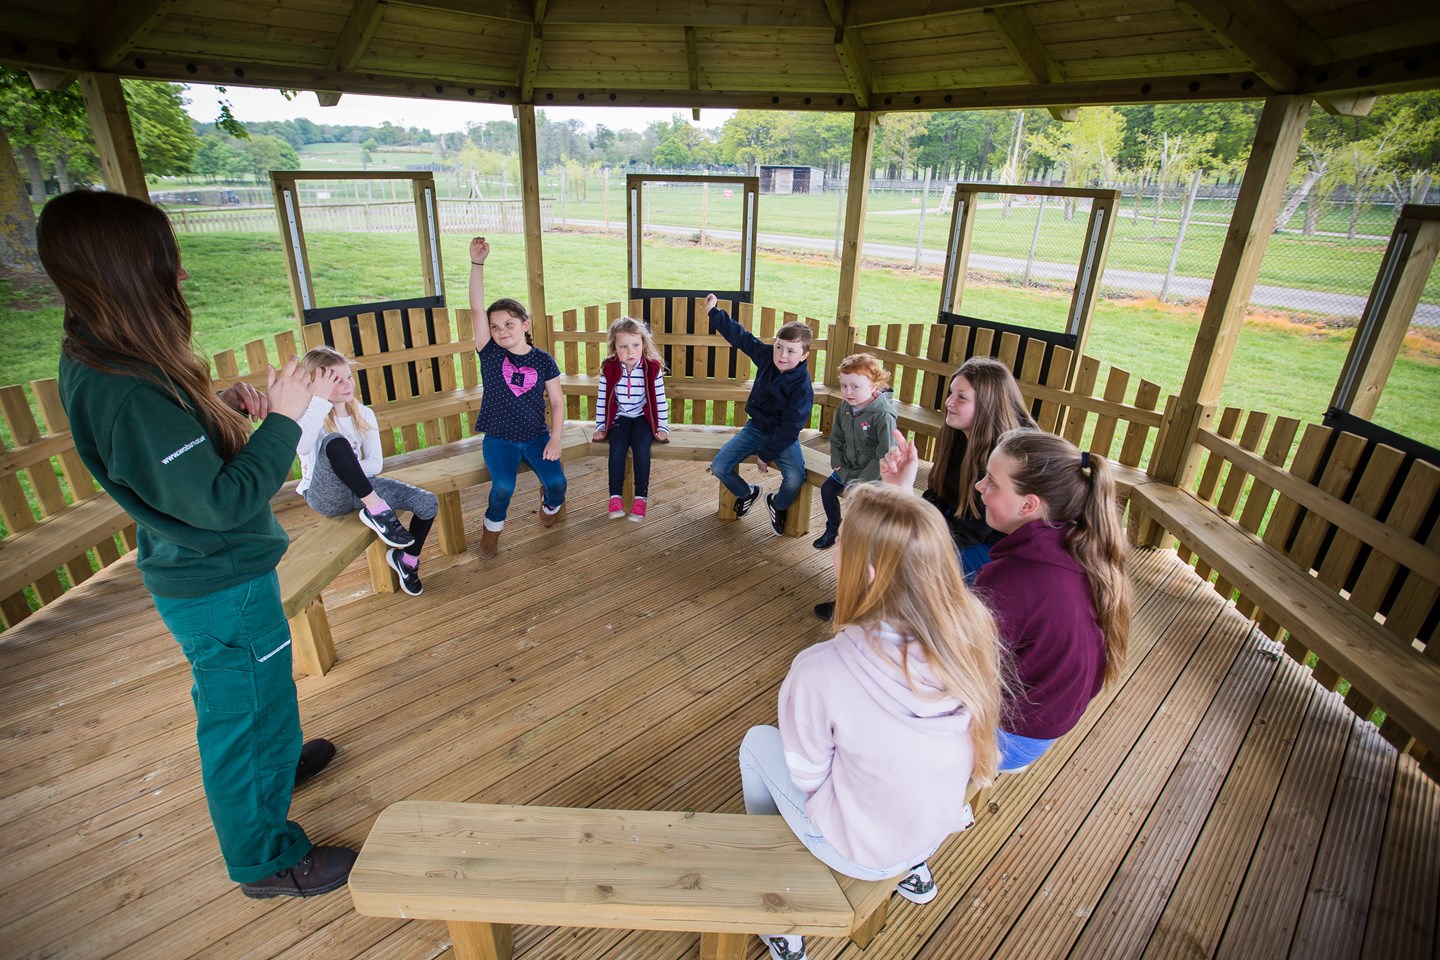 A group of children enjoy an educational session in Woburn Safari Park's outdoor classroom